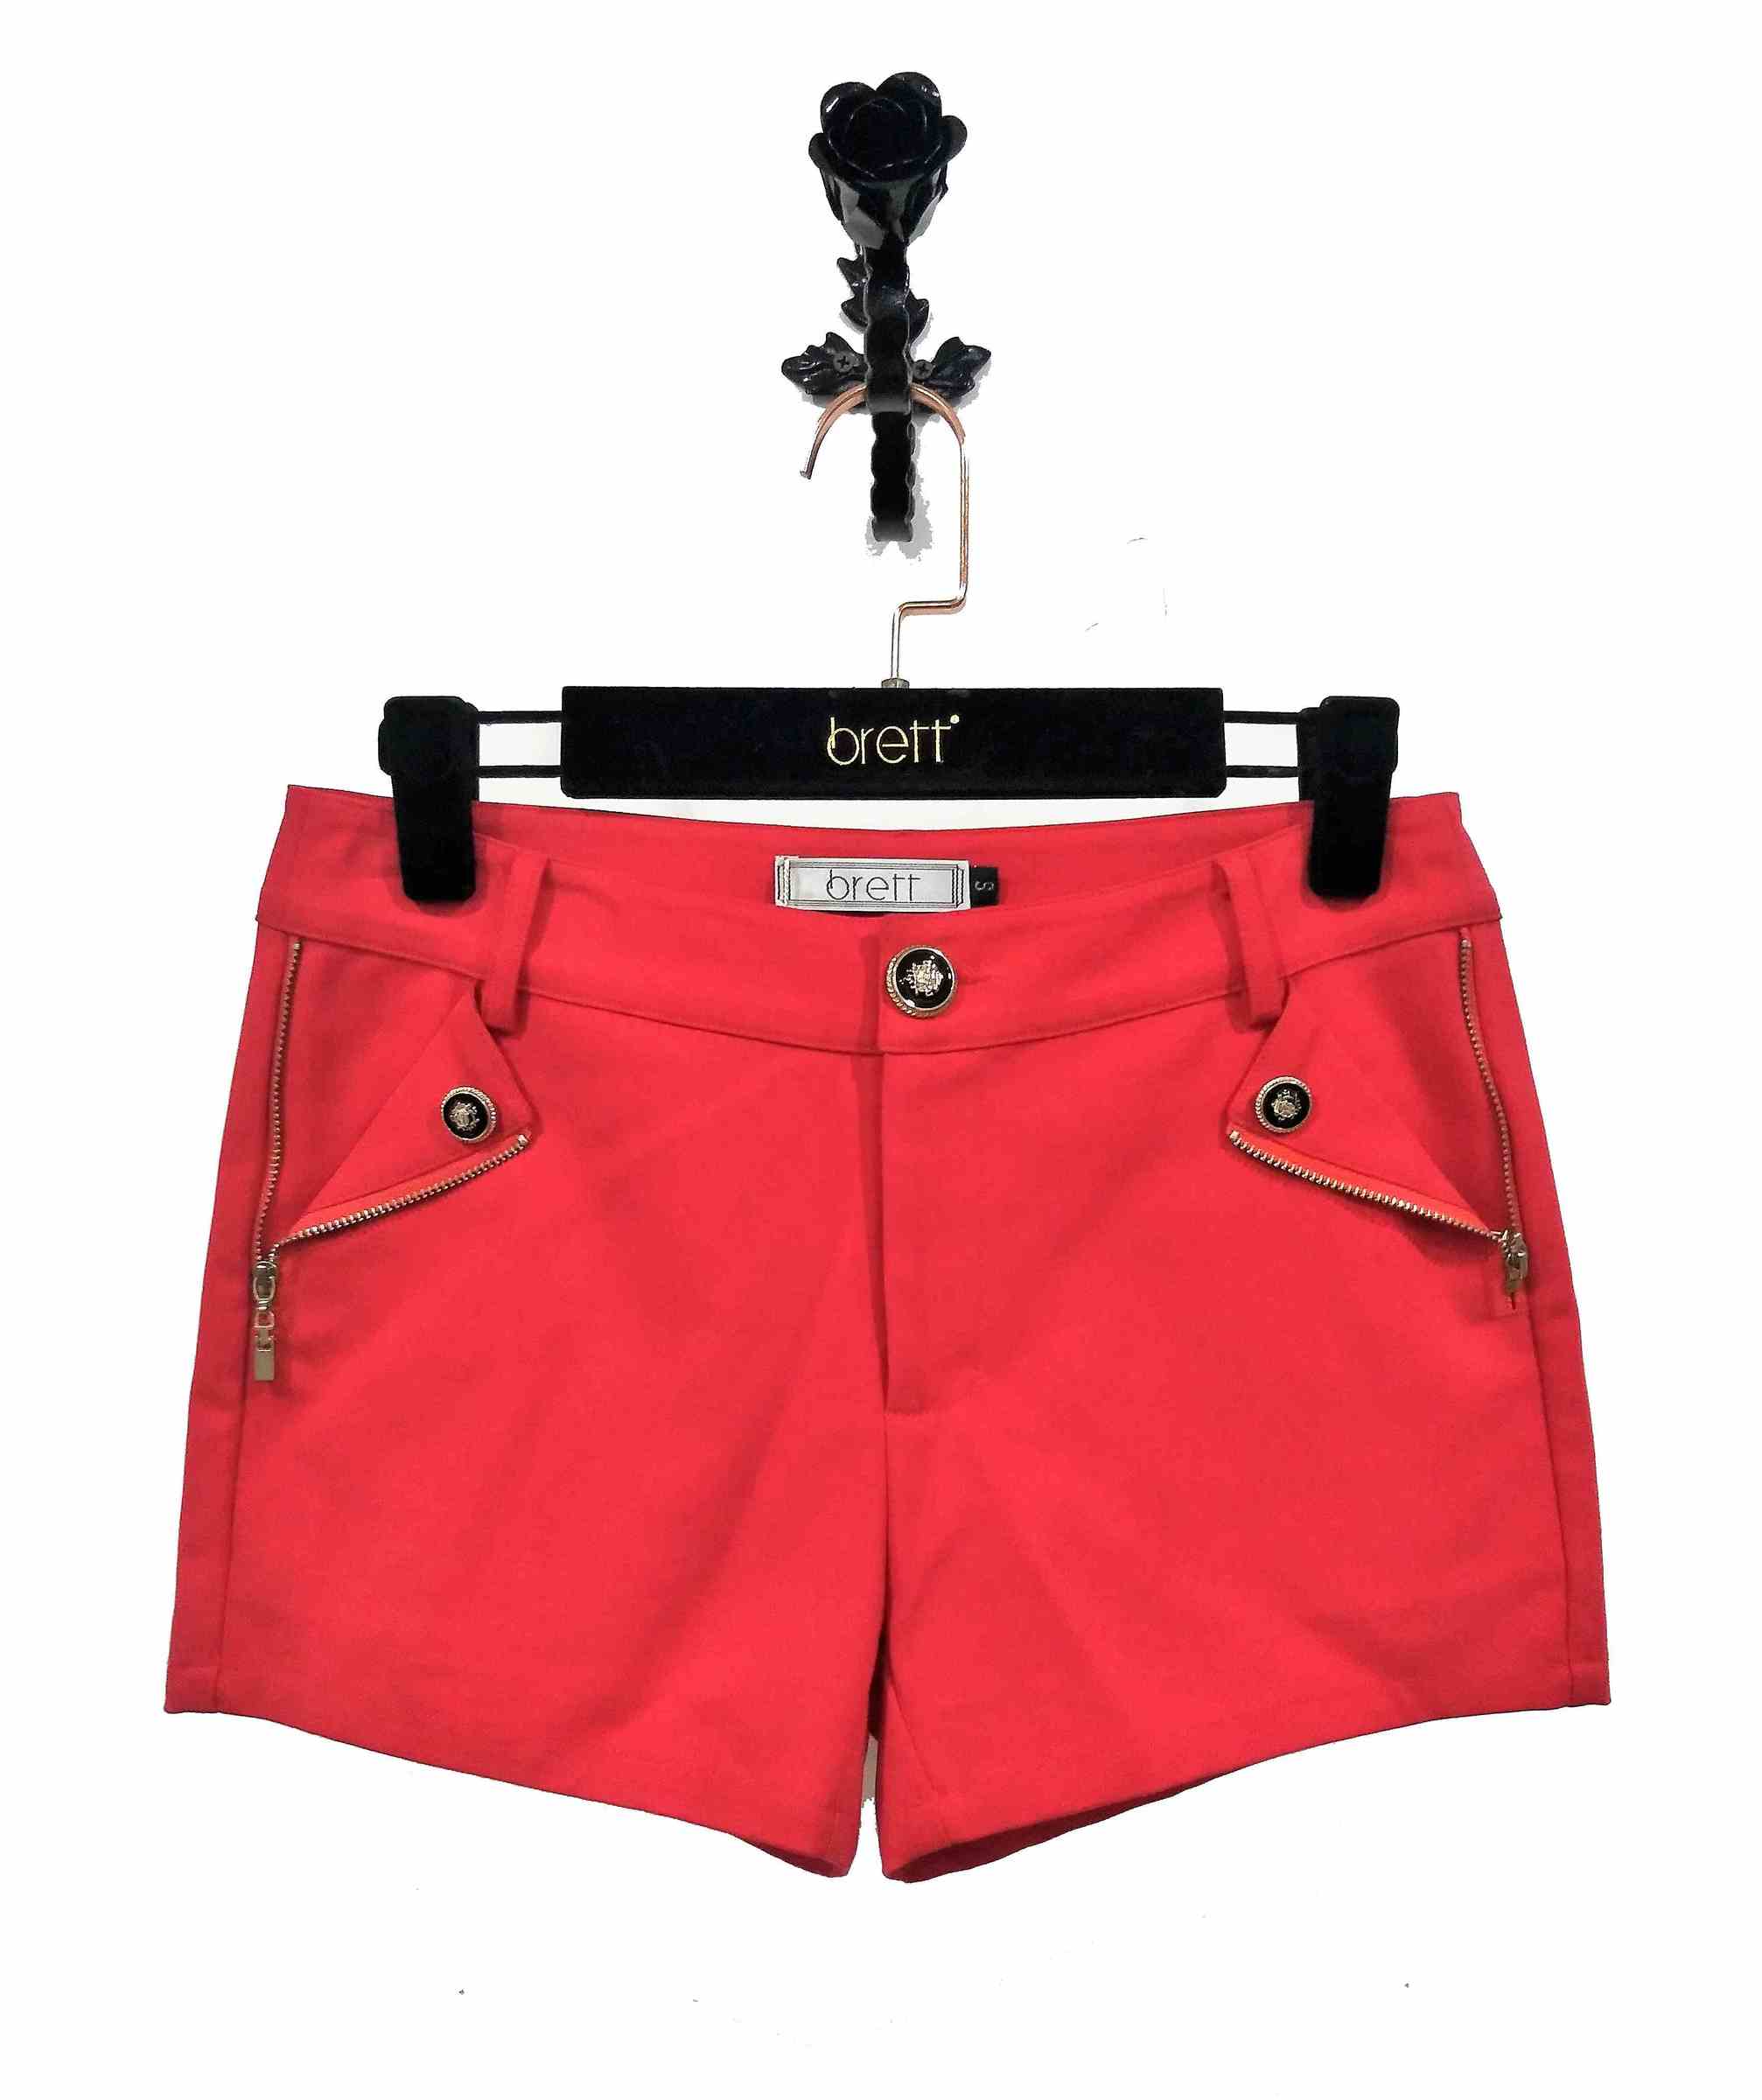 Latest red shorts designer fashion with casual shorts style button on pocket for cheap shorts odm oem service (1).jpg